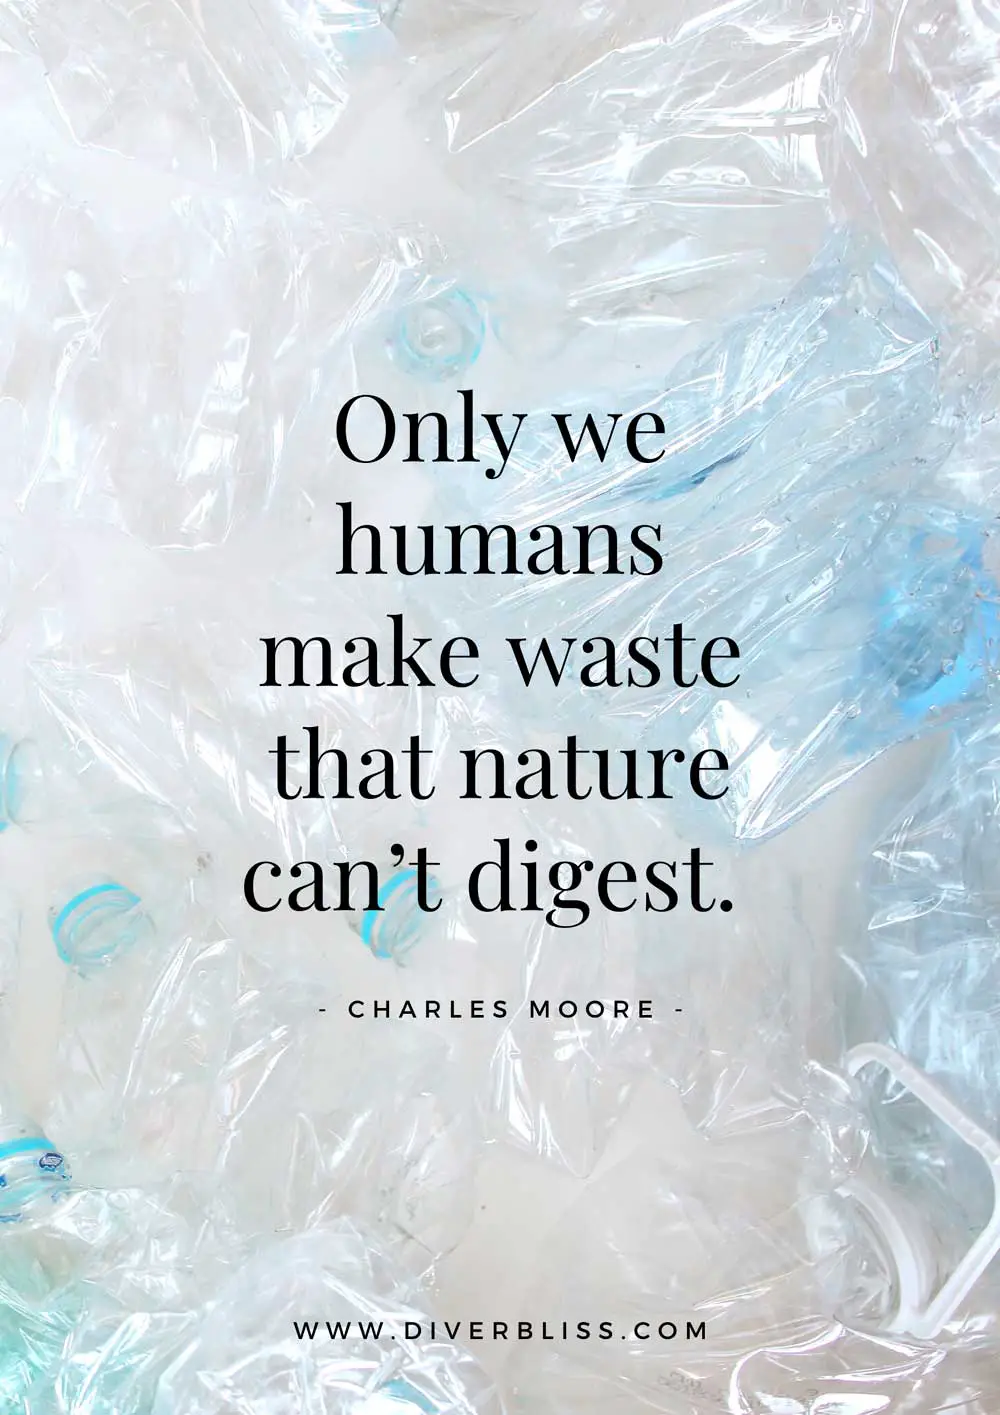 Plastic Waste Quotes Poster: “Only we humans make waste that nature can’t digest.”– Captain Charles Moore